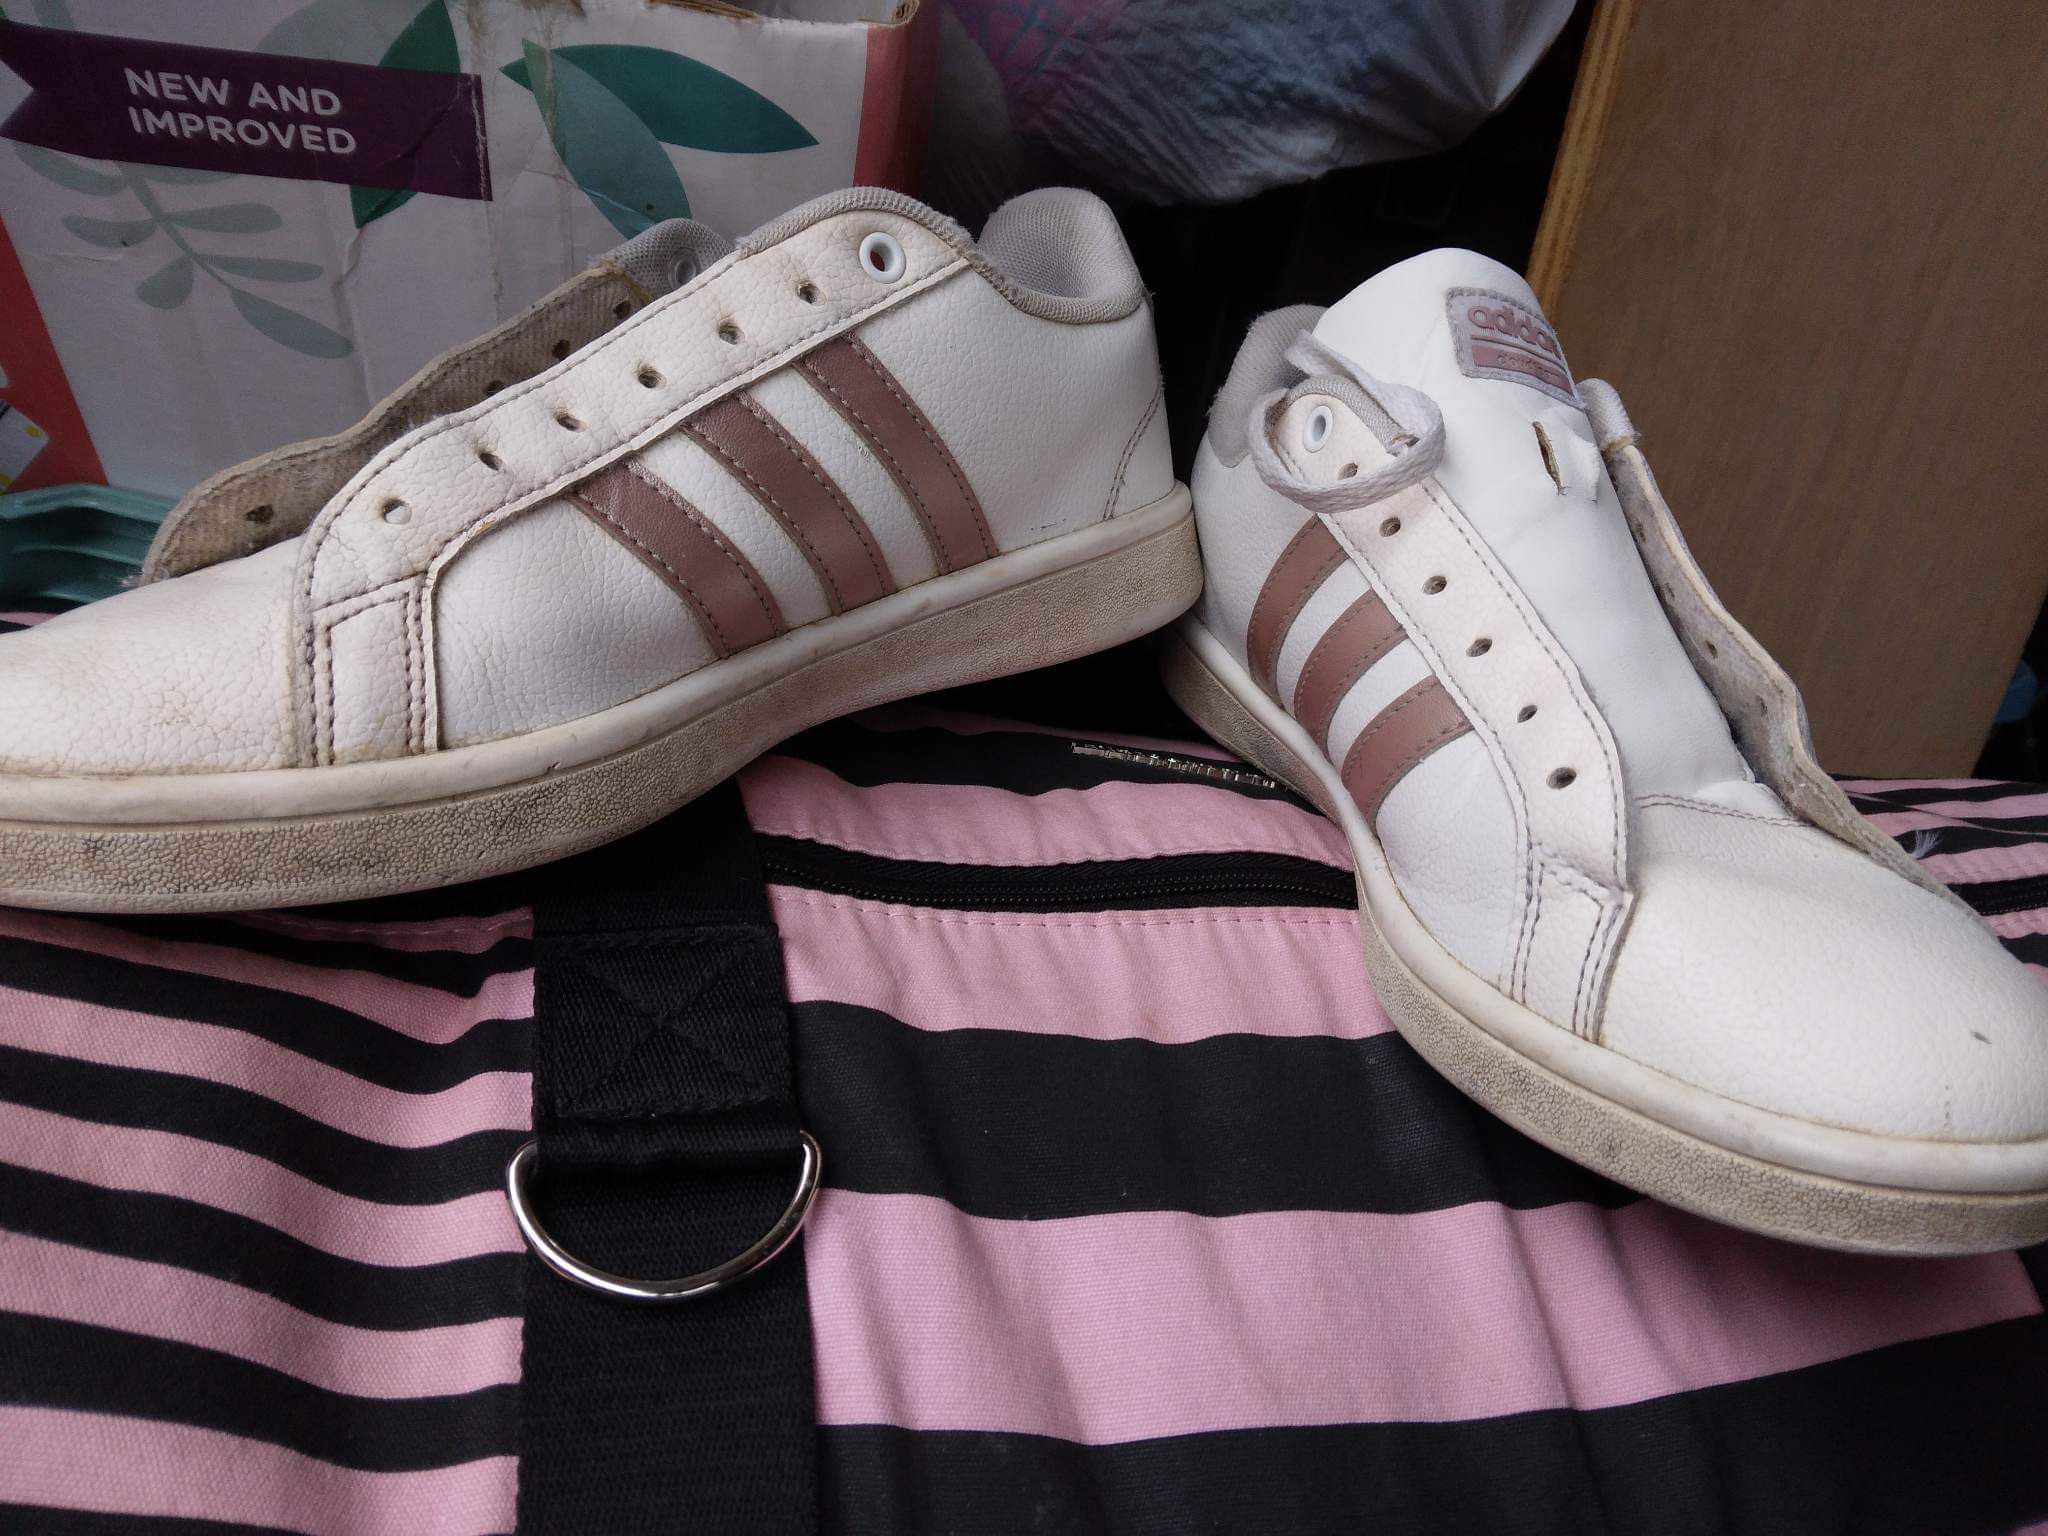 Rose Adidas Shoes for Sale New IN - OfferUp